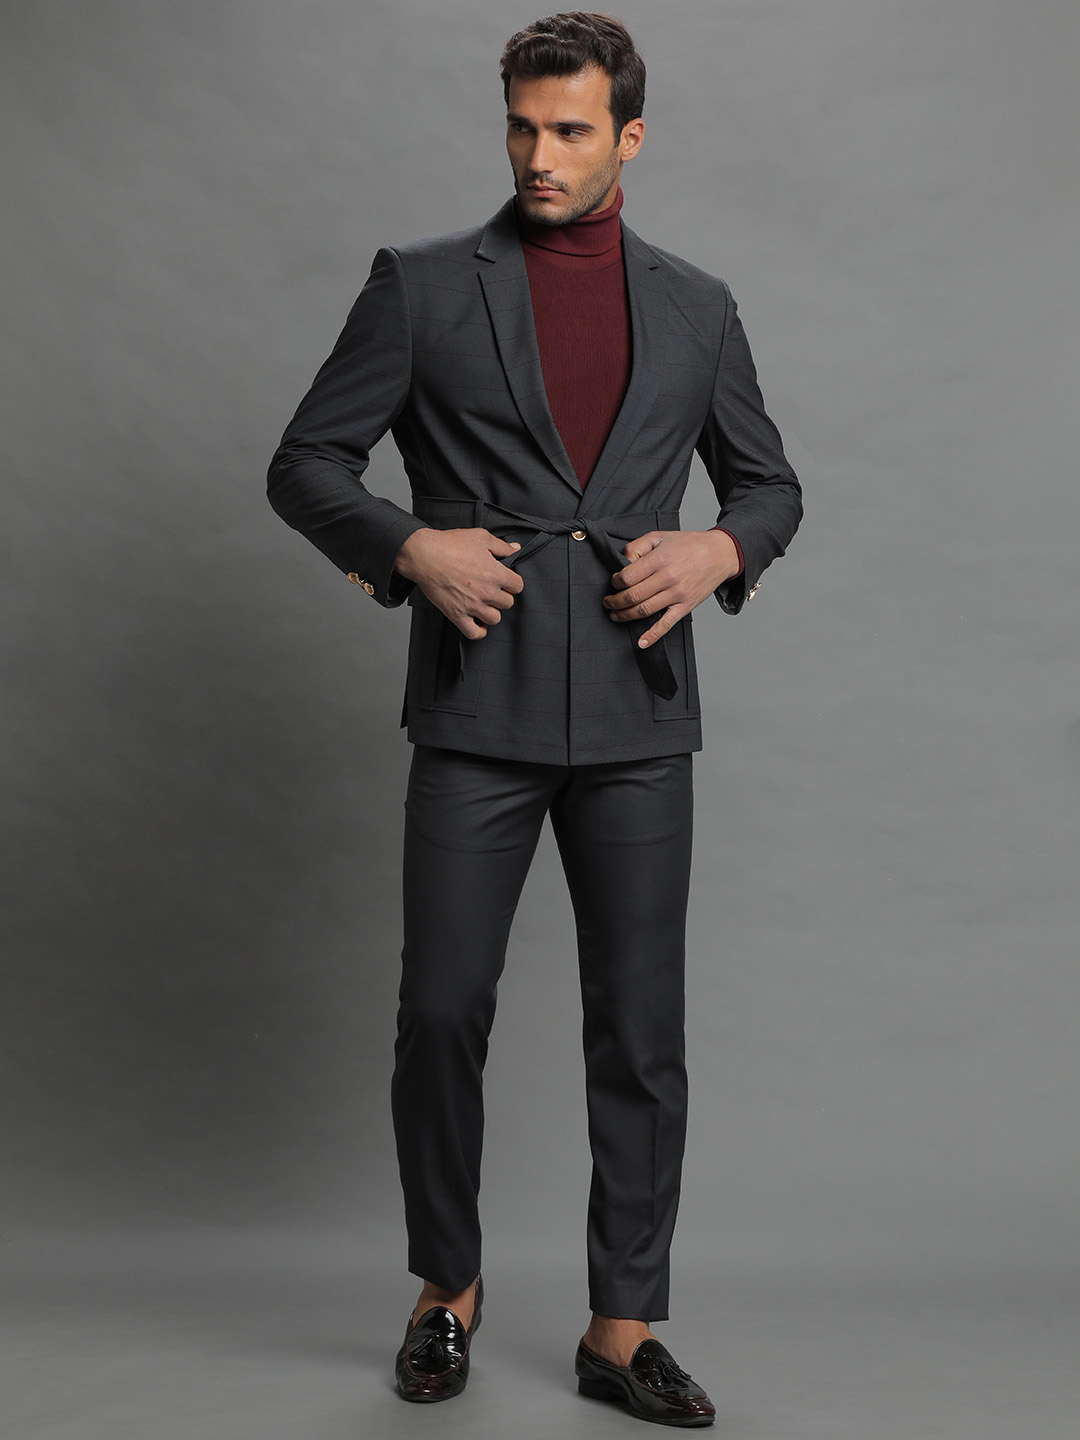 Grey Knot Style Pocket Suit